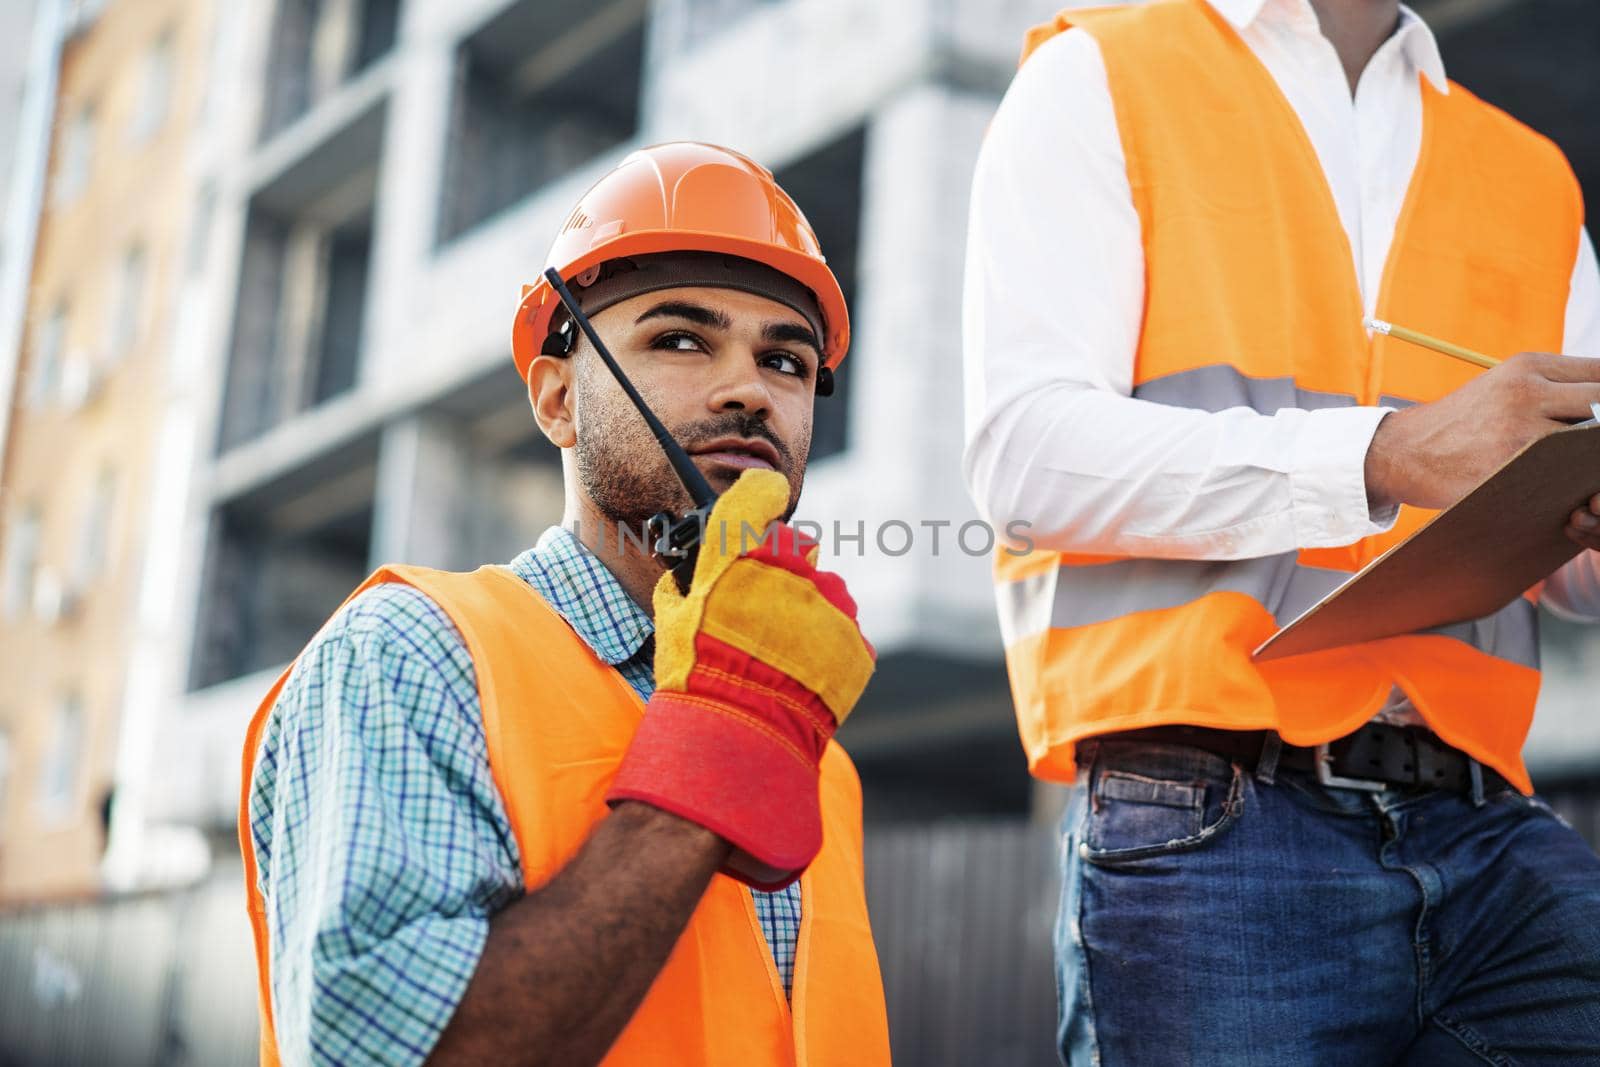 Young construction worker in uniform using walkie talkie on site, close up portrait